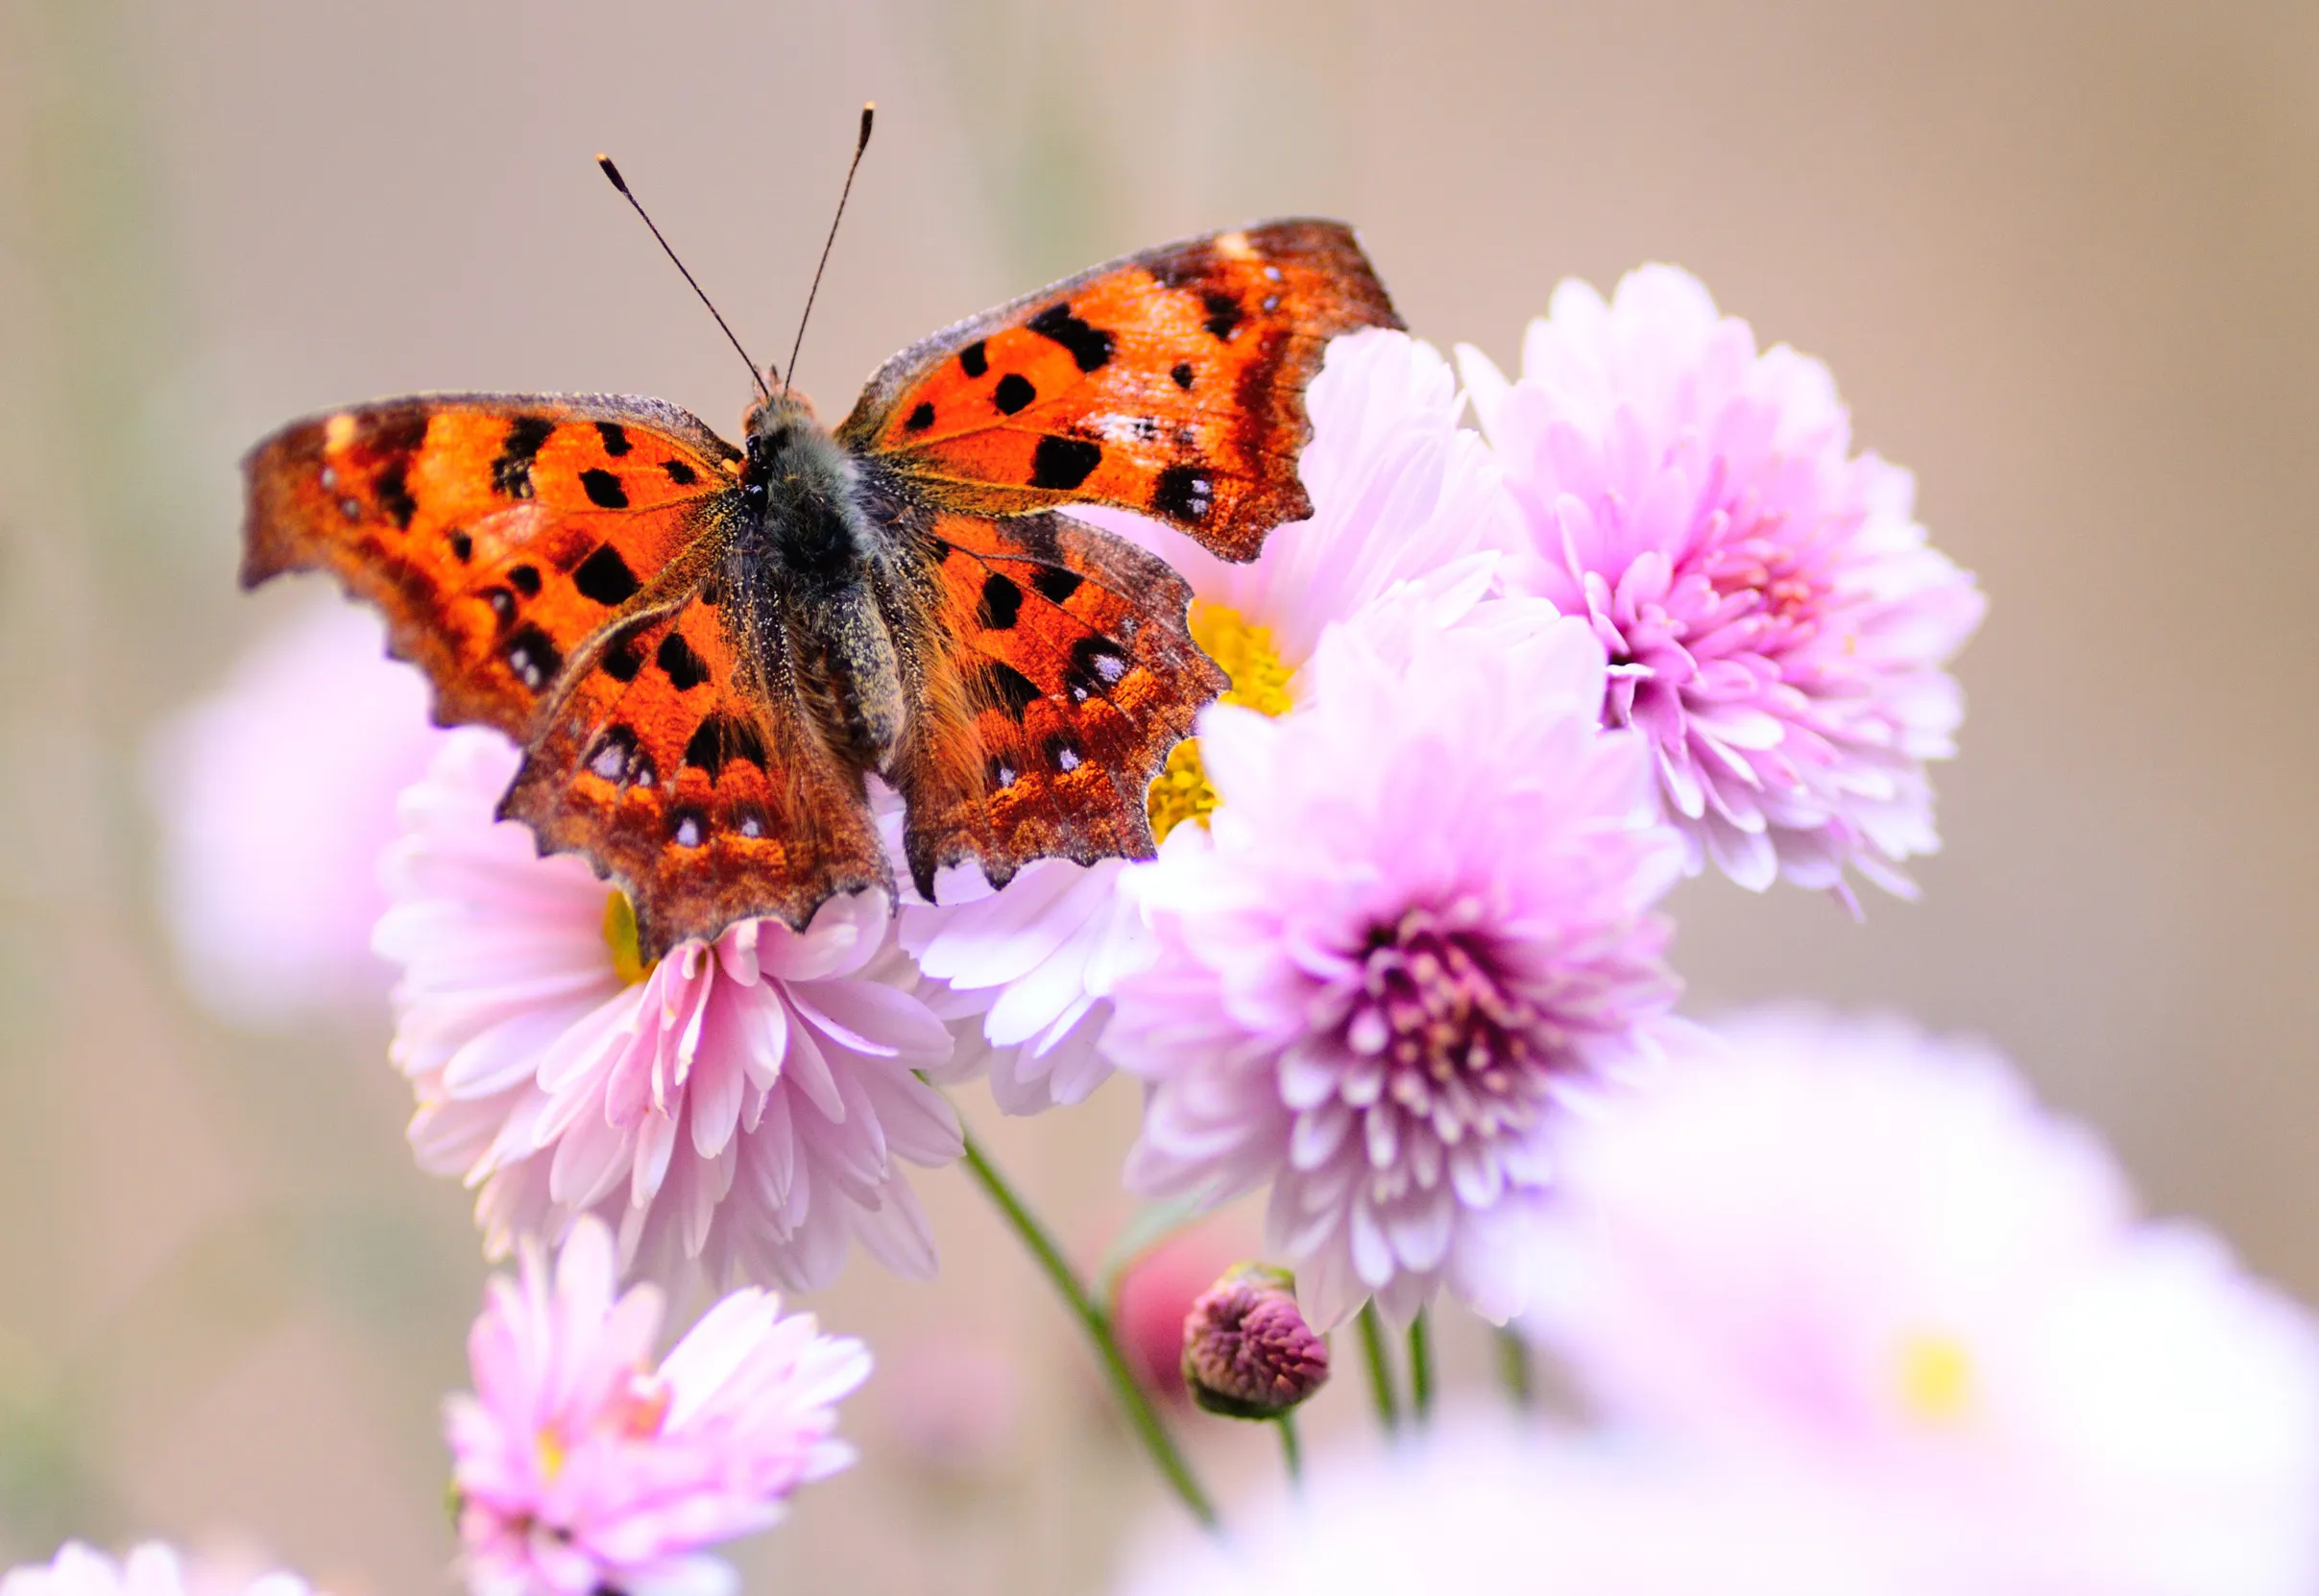 A Comma Butterfly resting on a pink flower.